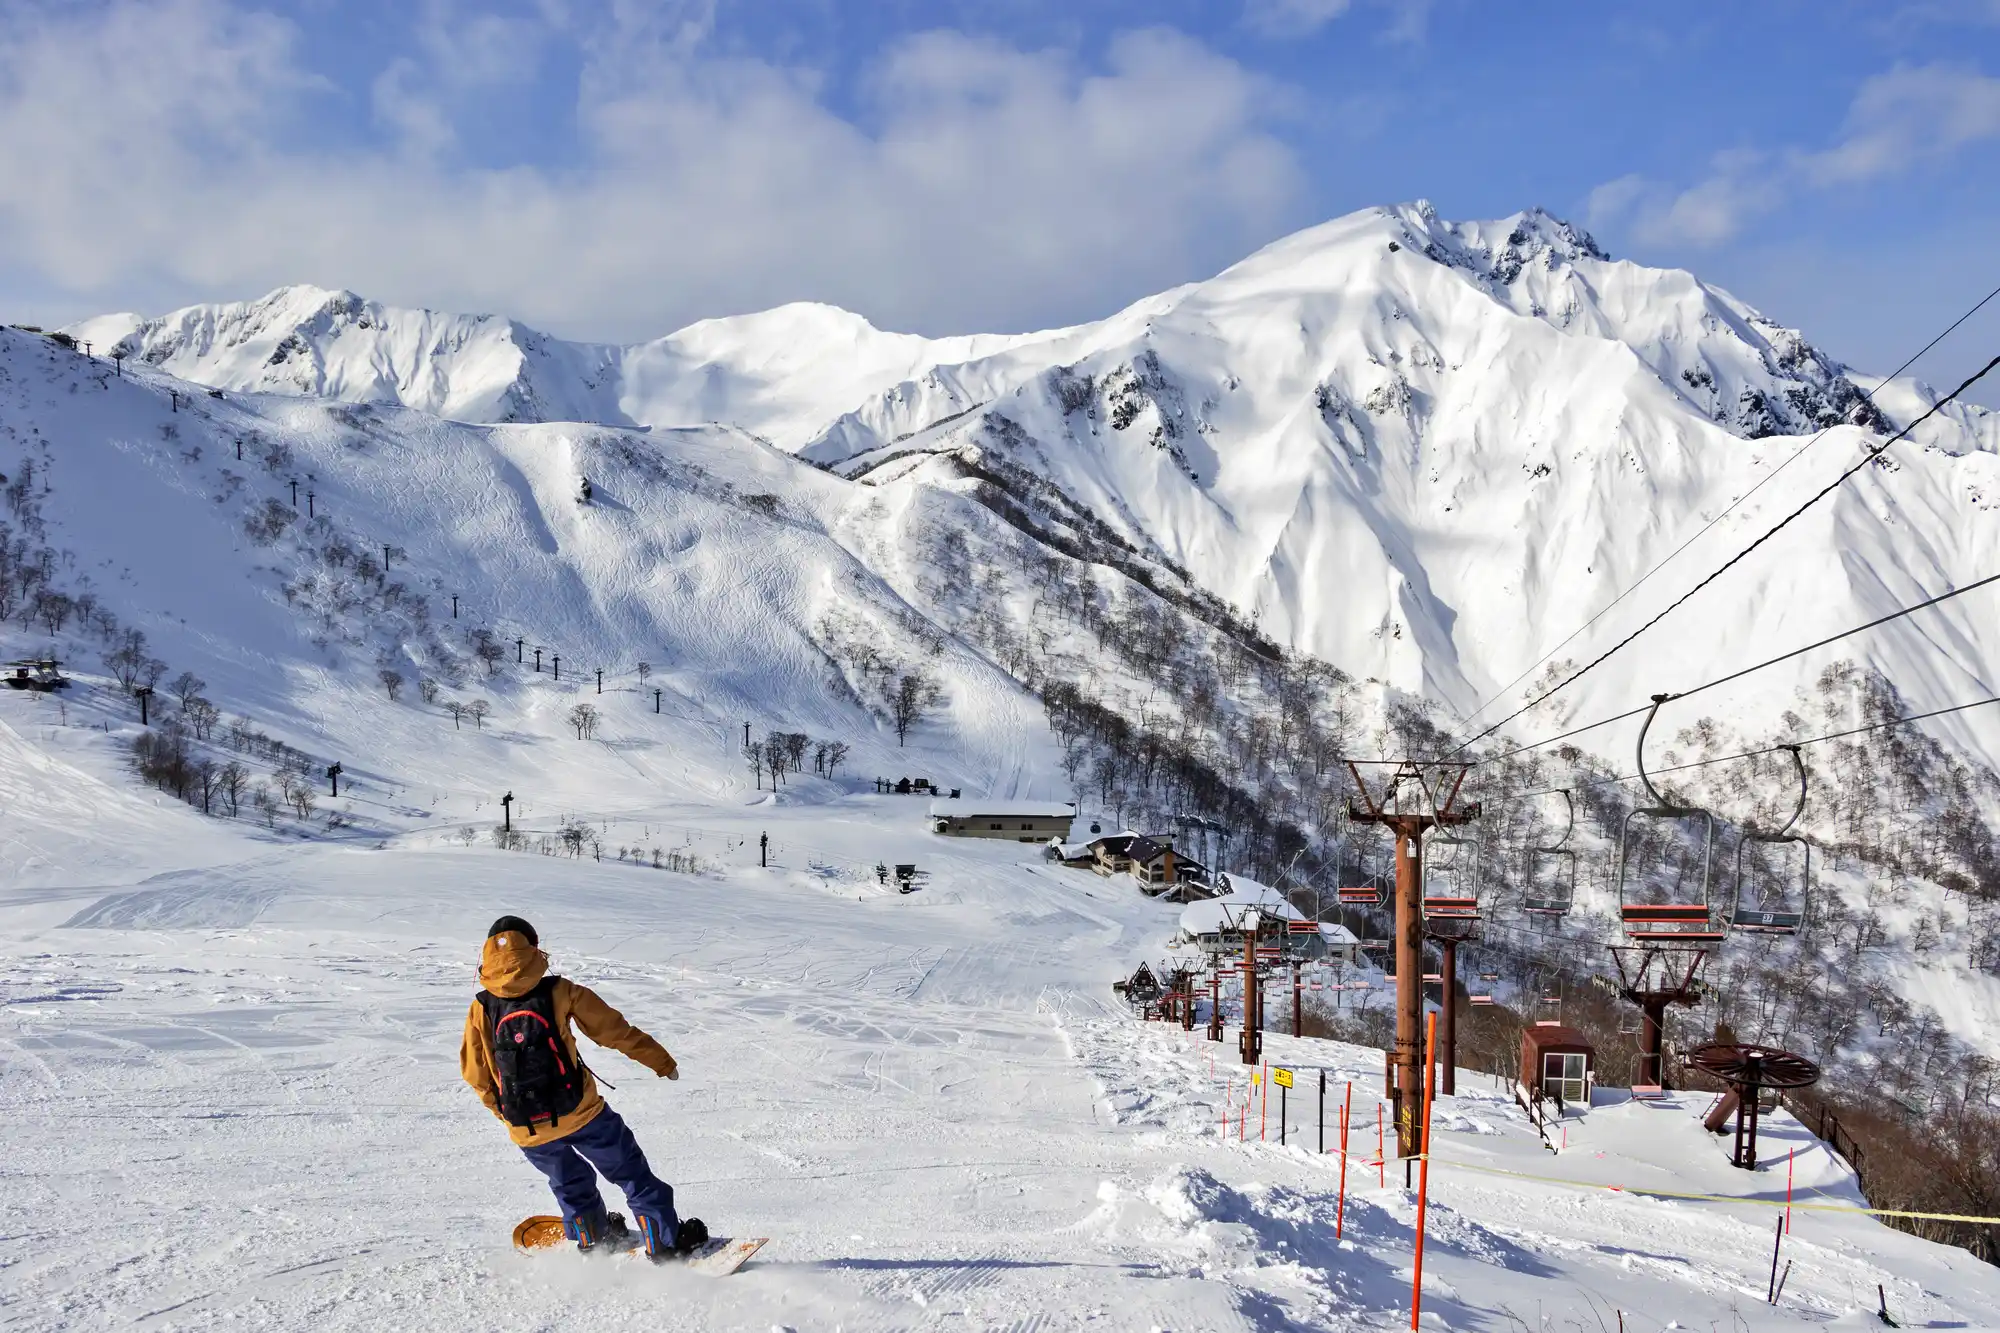 6 Recommended Ski and Onsen destinations